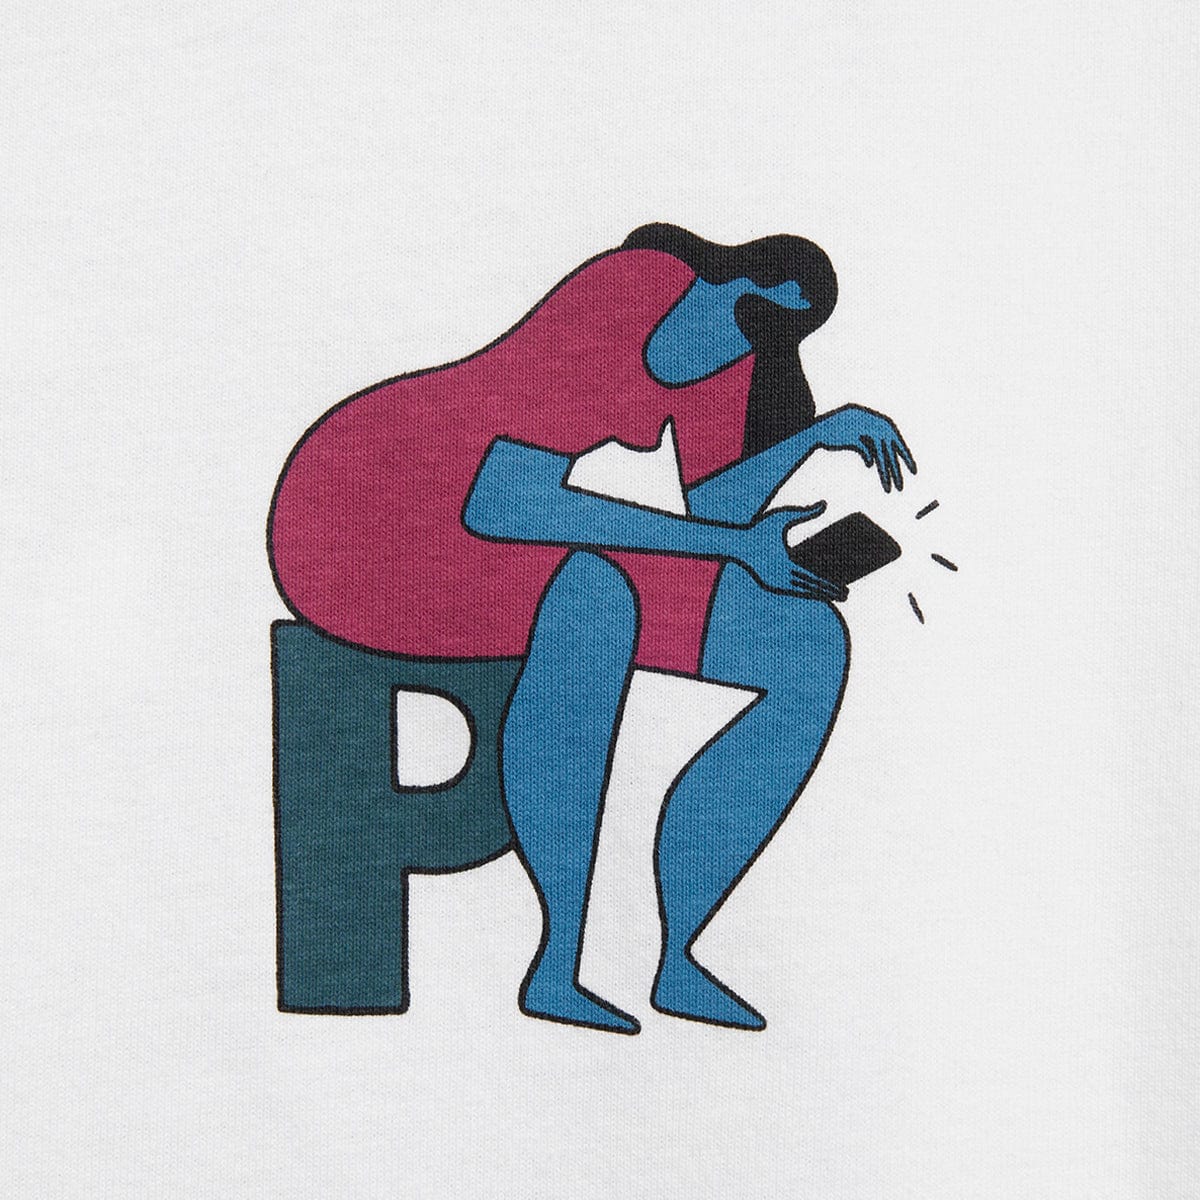 By Parra T-Shirts INSECURE DAYS T-SHIRT